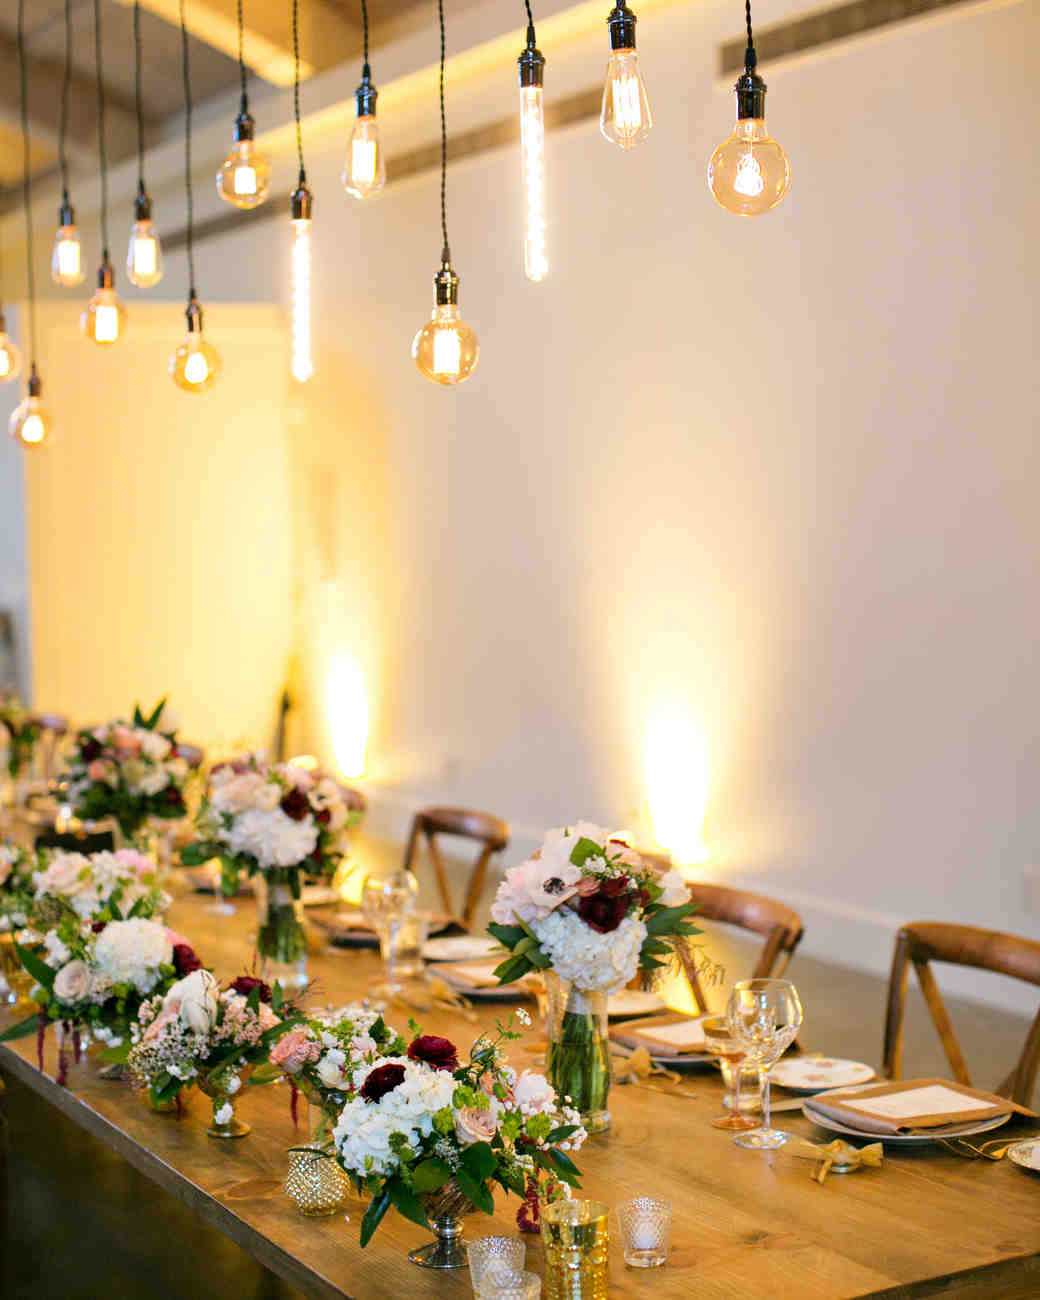 28 Ideas for Sitting Pretty at Your Head Table Martha